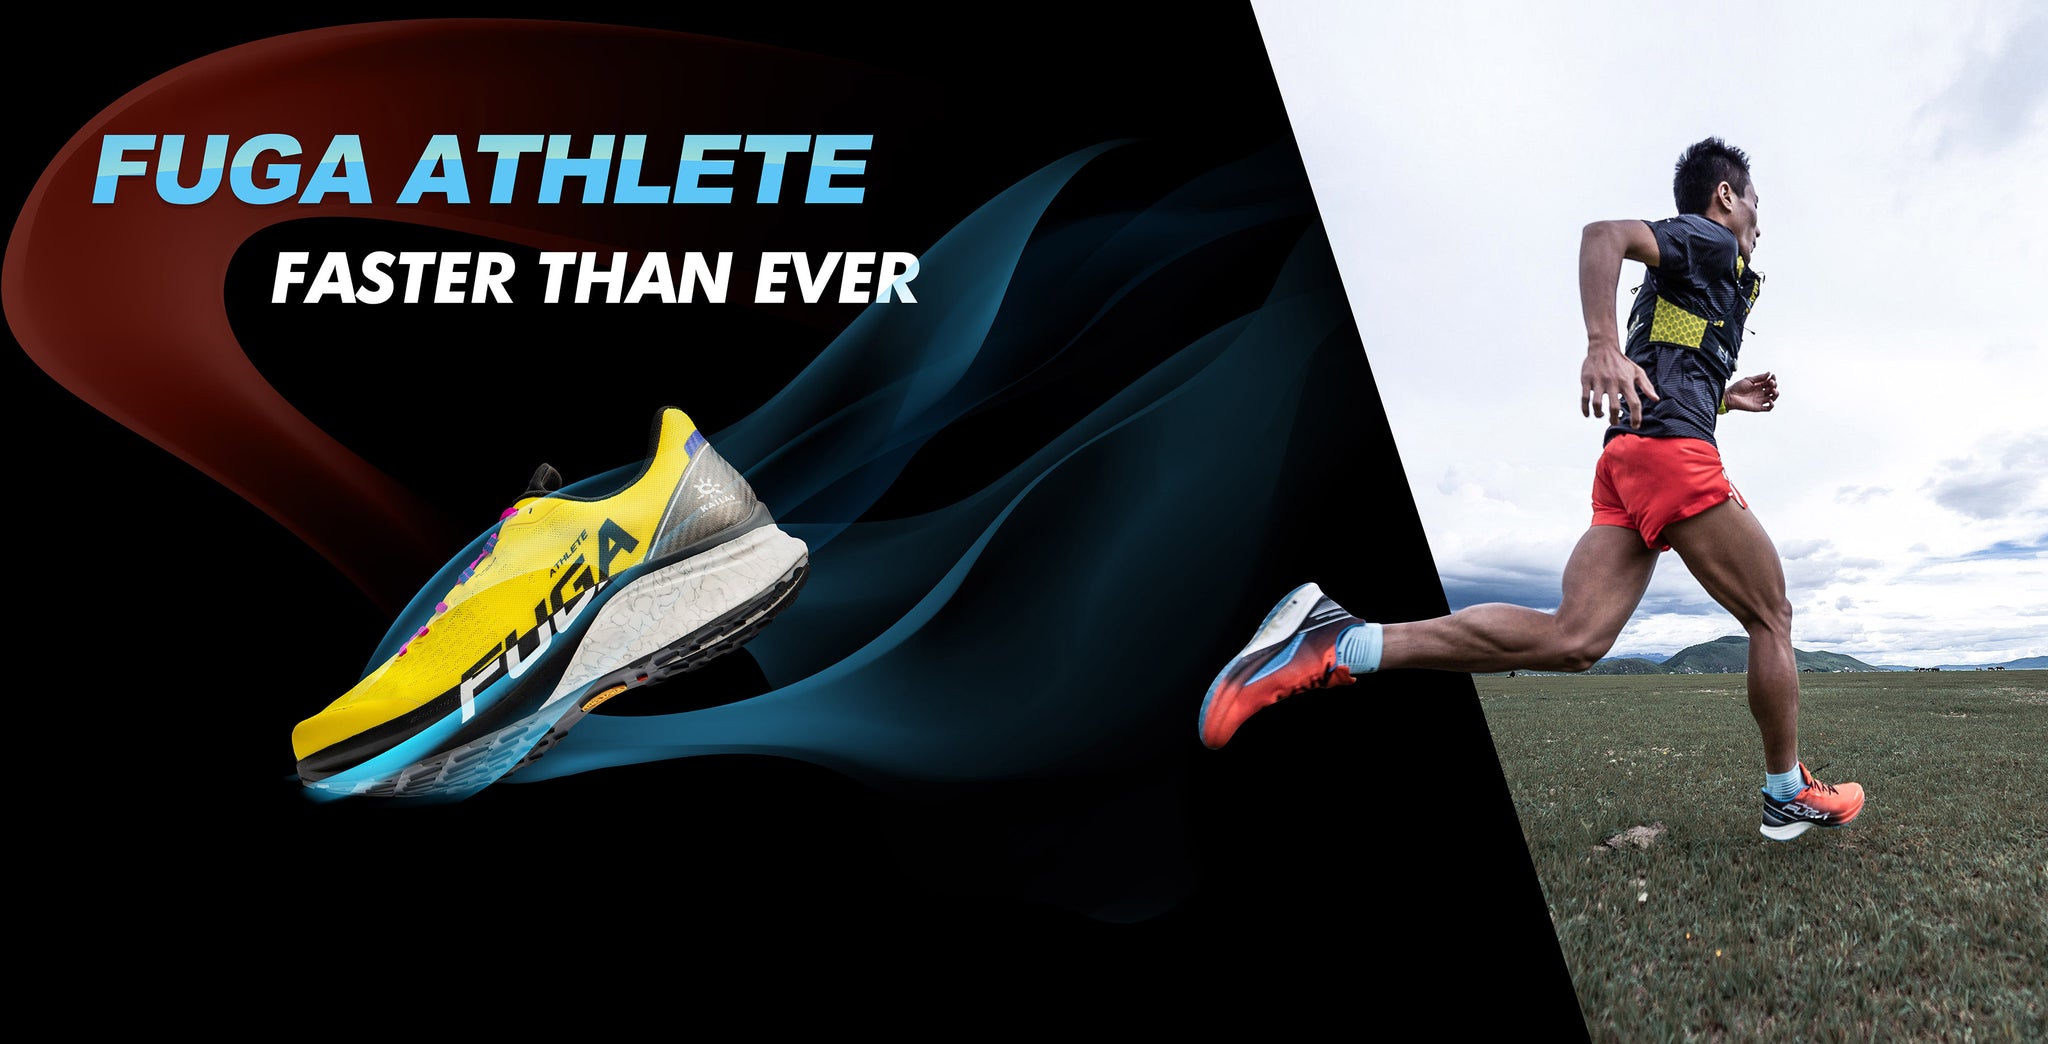 FUGA ATHLETE - Faster Than Ever